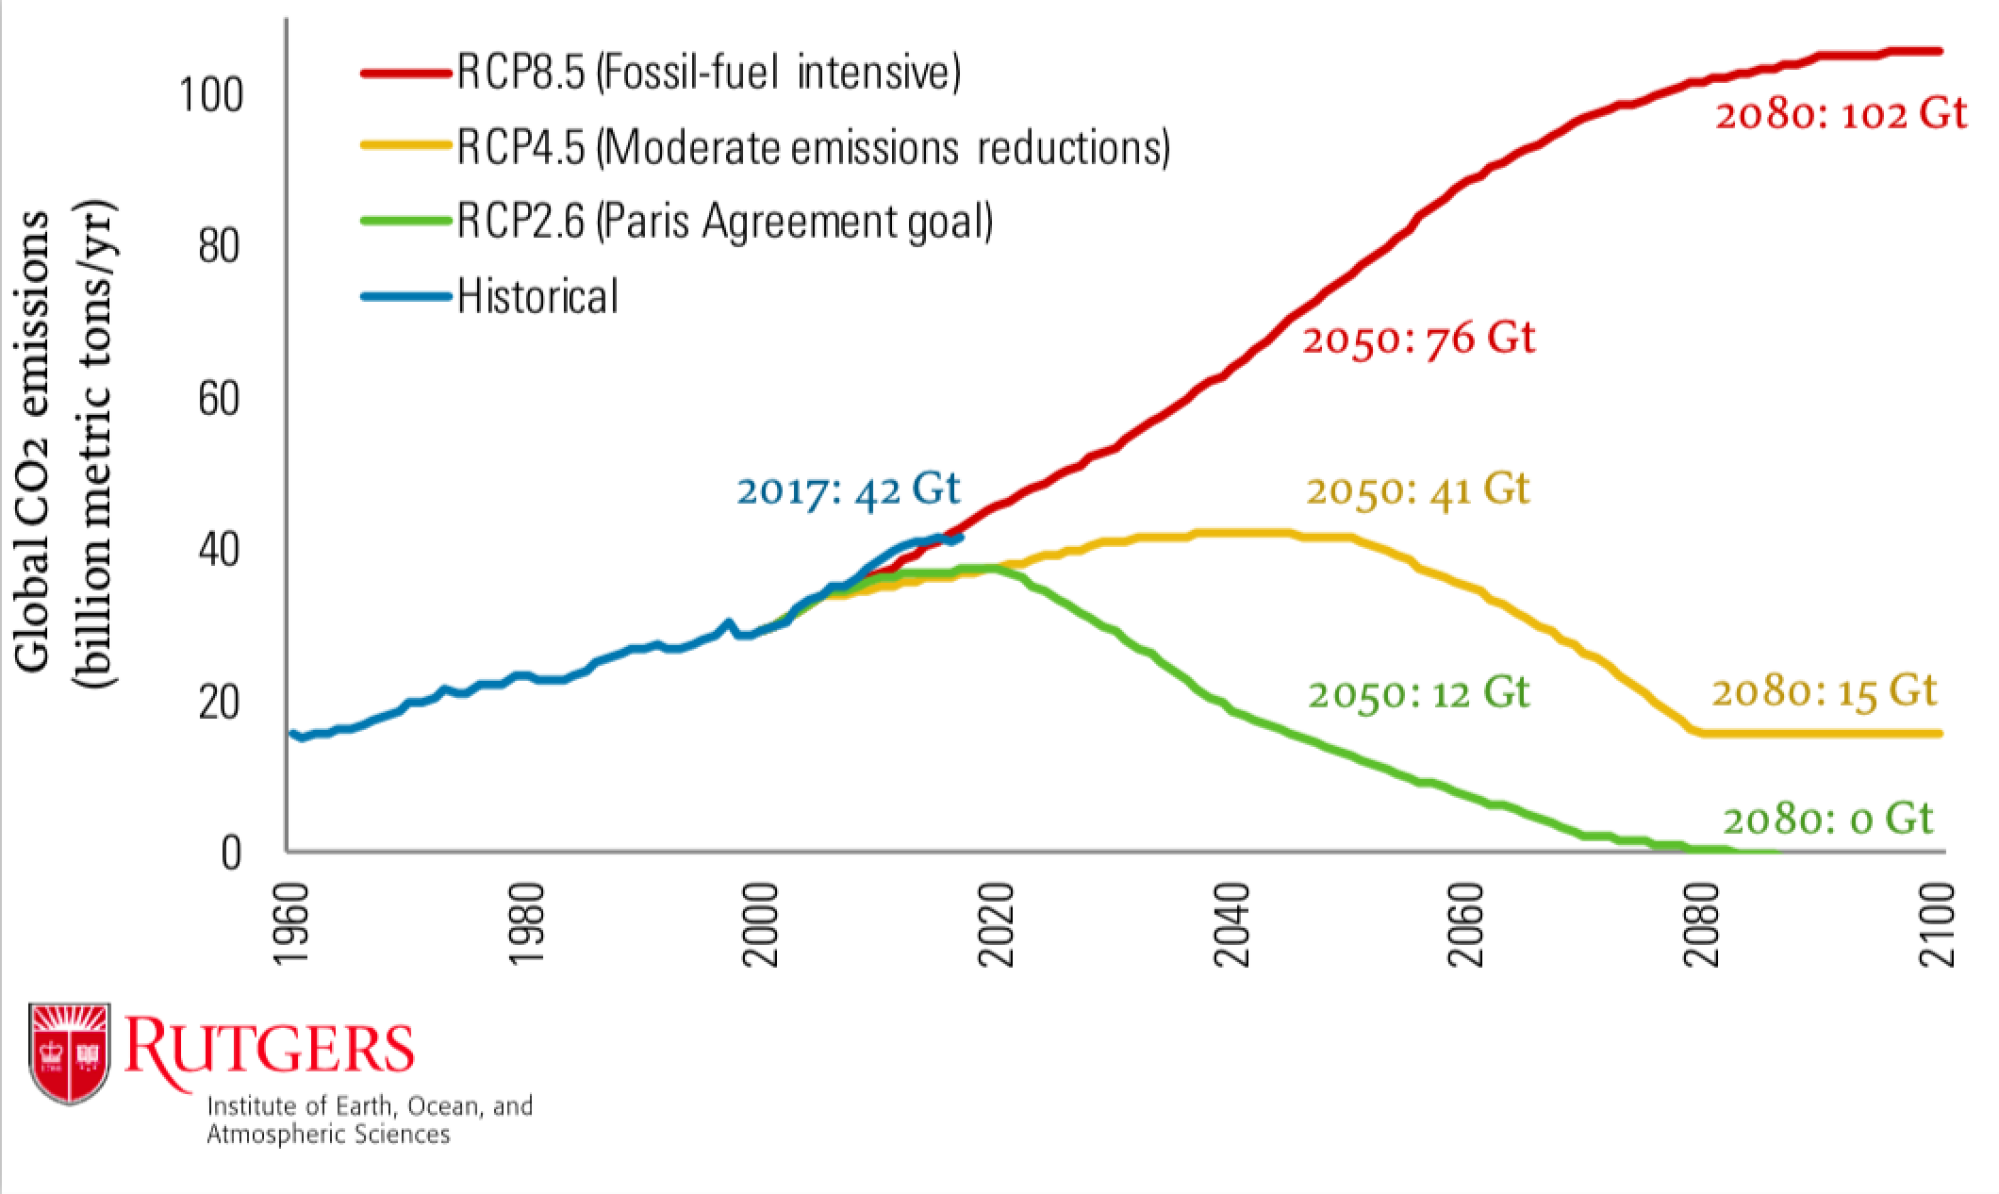 The red line shows a high carbon emissions scenario.